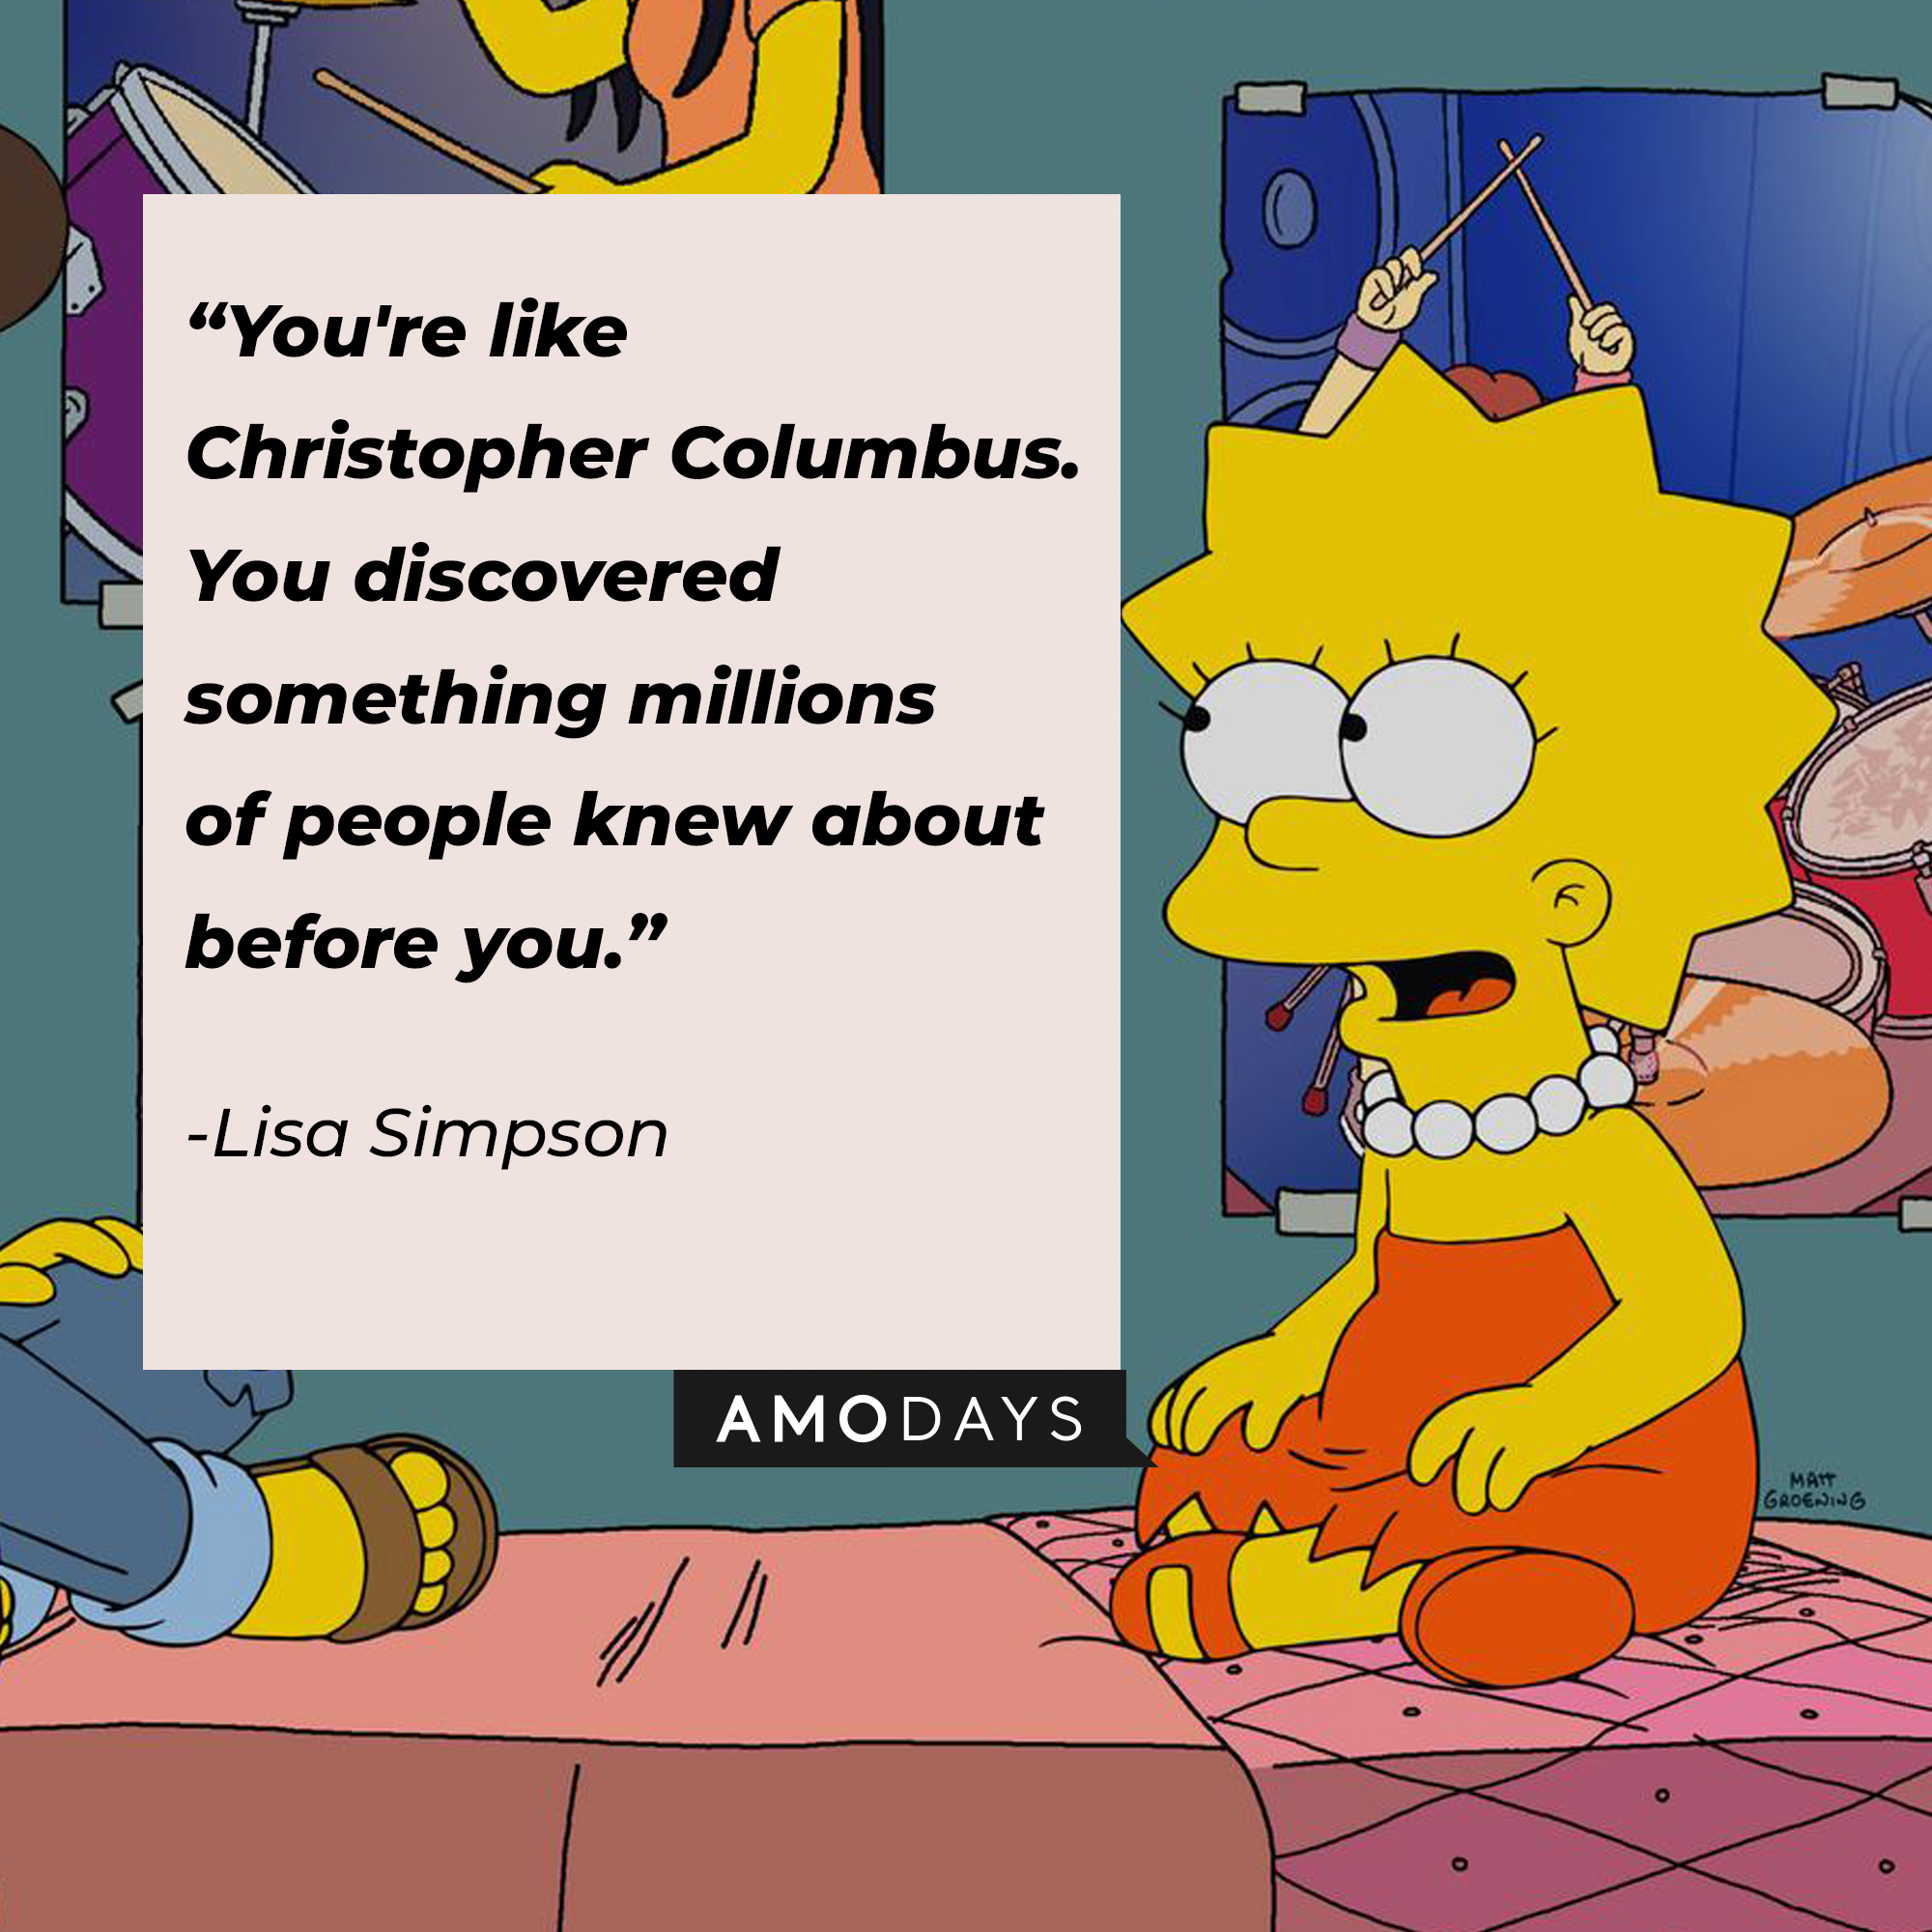 Lisa Simpson, with her quote: "You're like Christopher Columbus. You discovered something millions of people knew about before you."  | Source: facebook.com/TheSimpsons